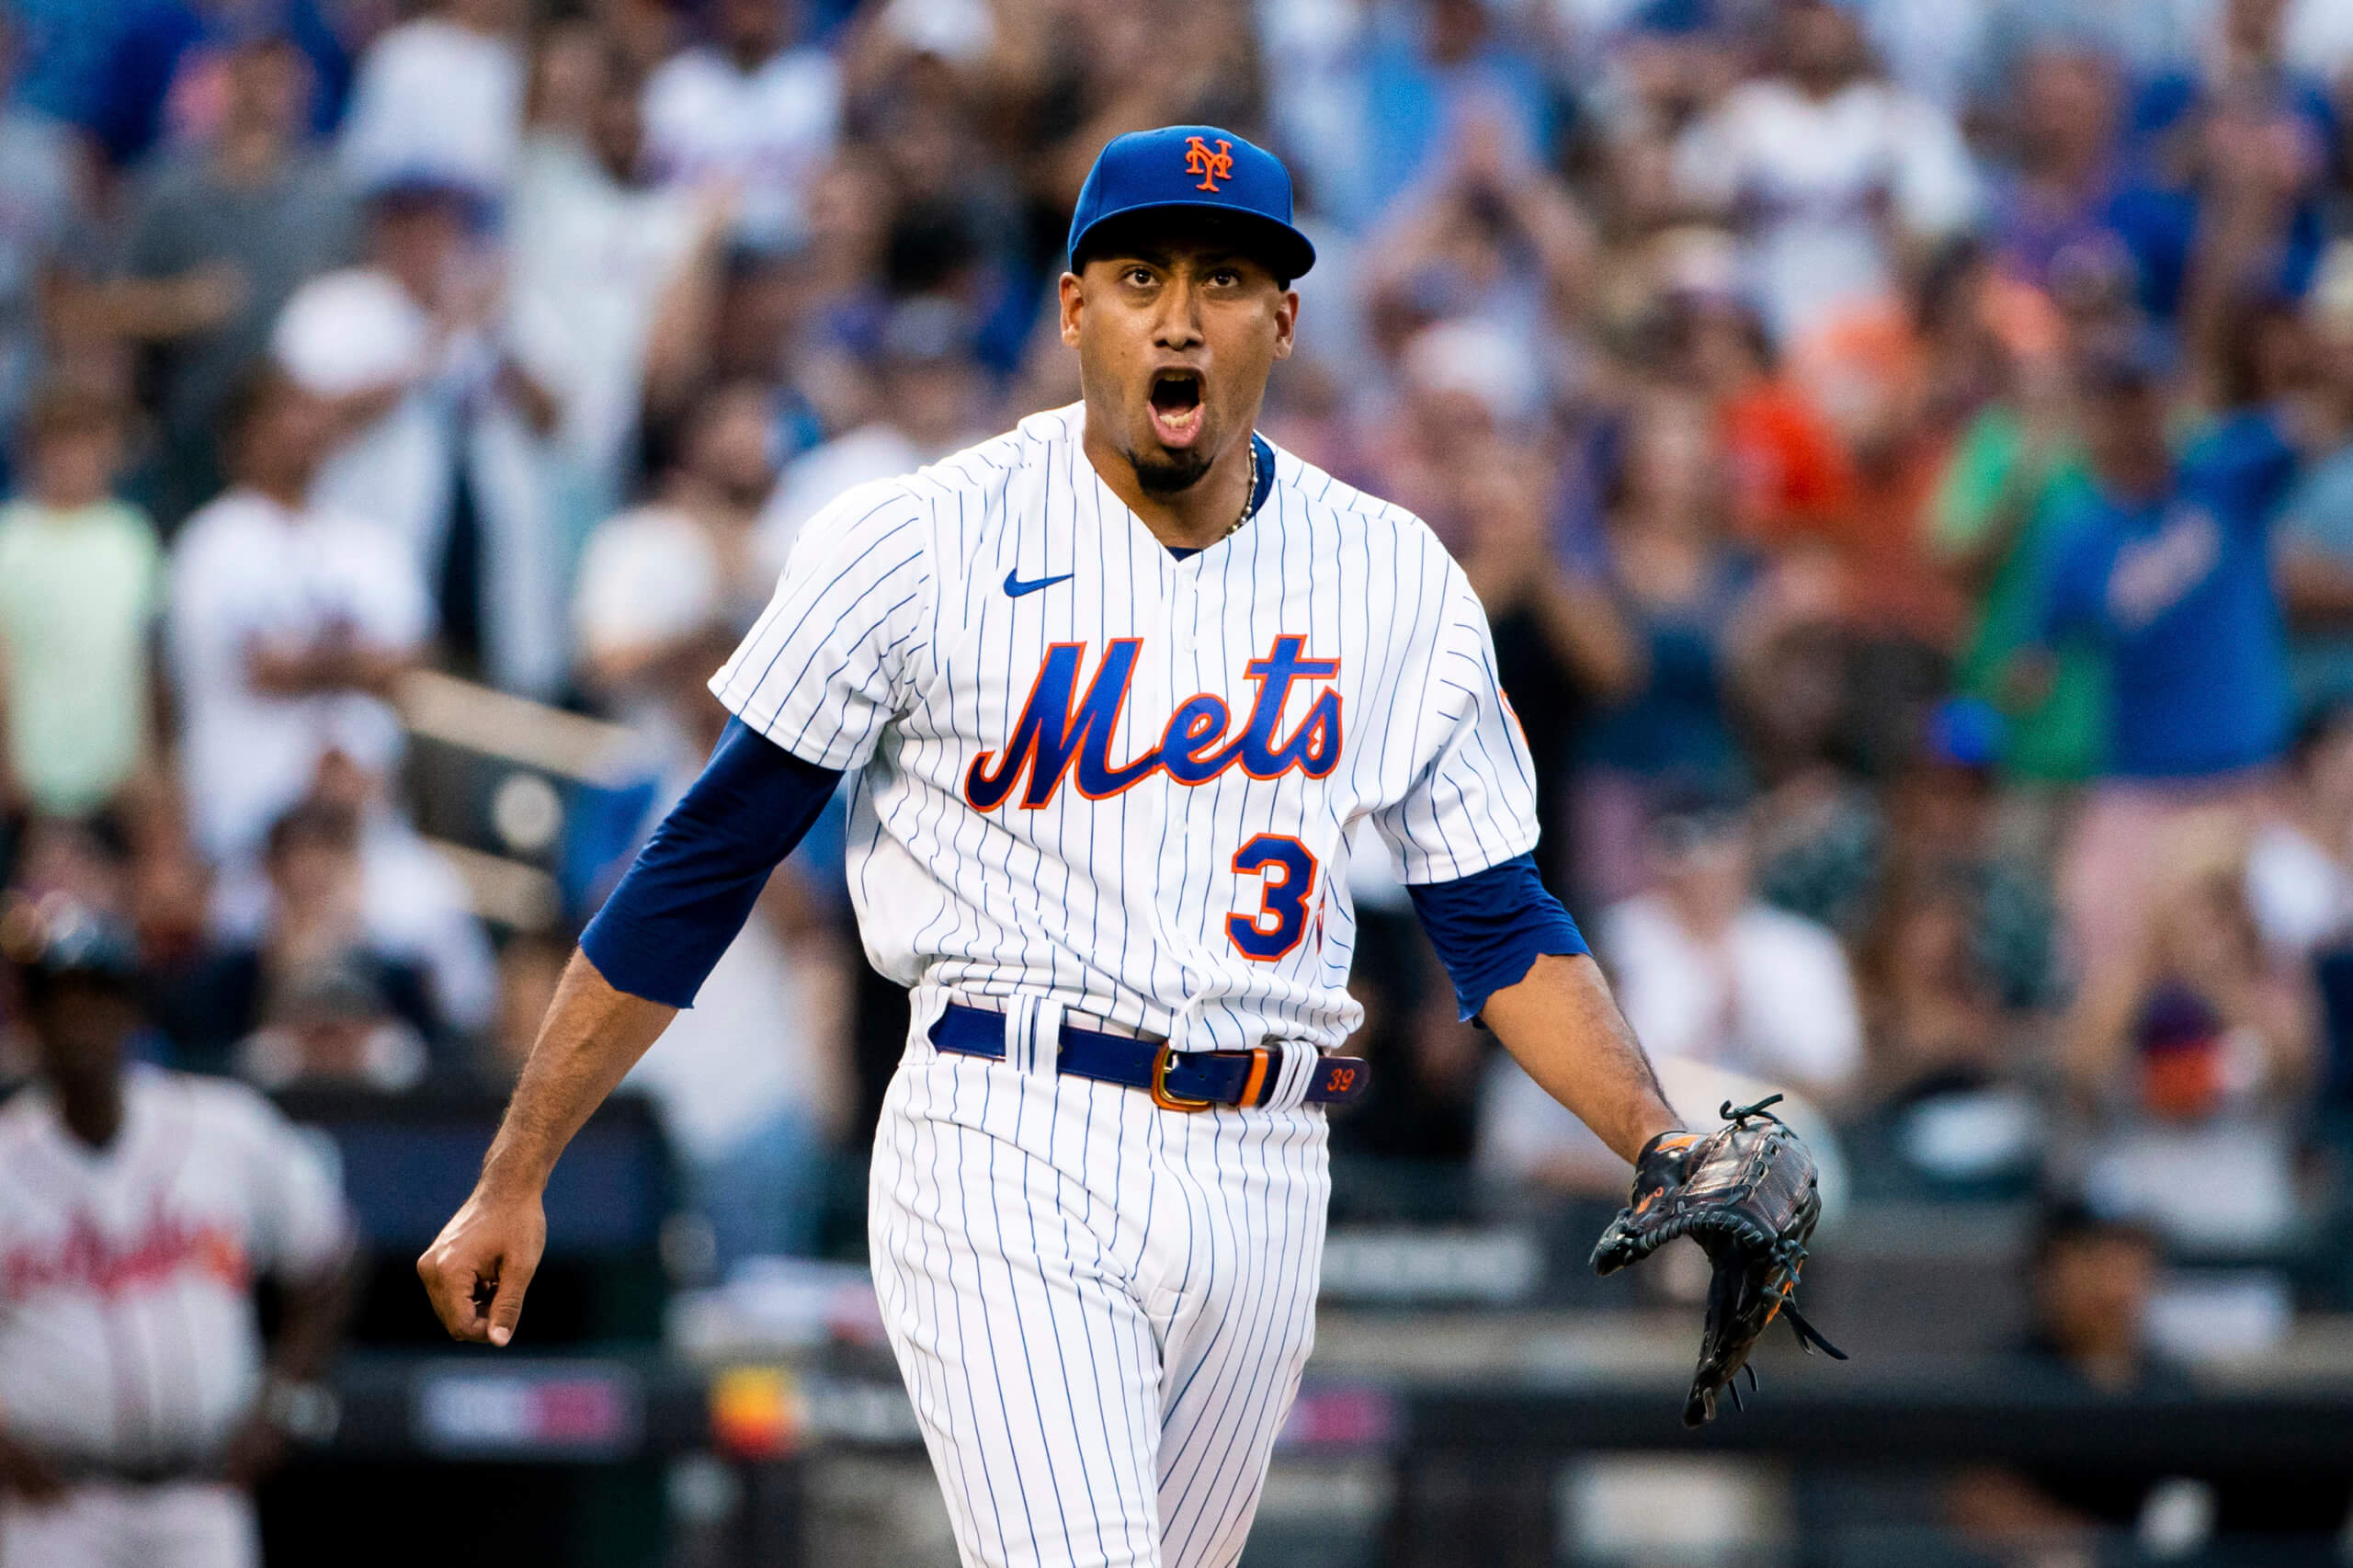 Mets re-sign star closer Edwin Diaz to a 5-year deal